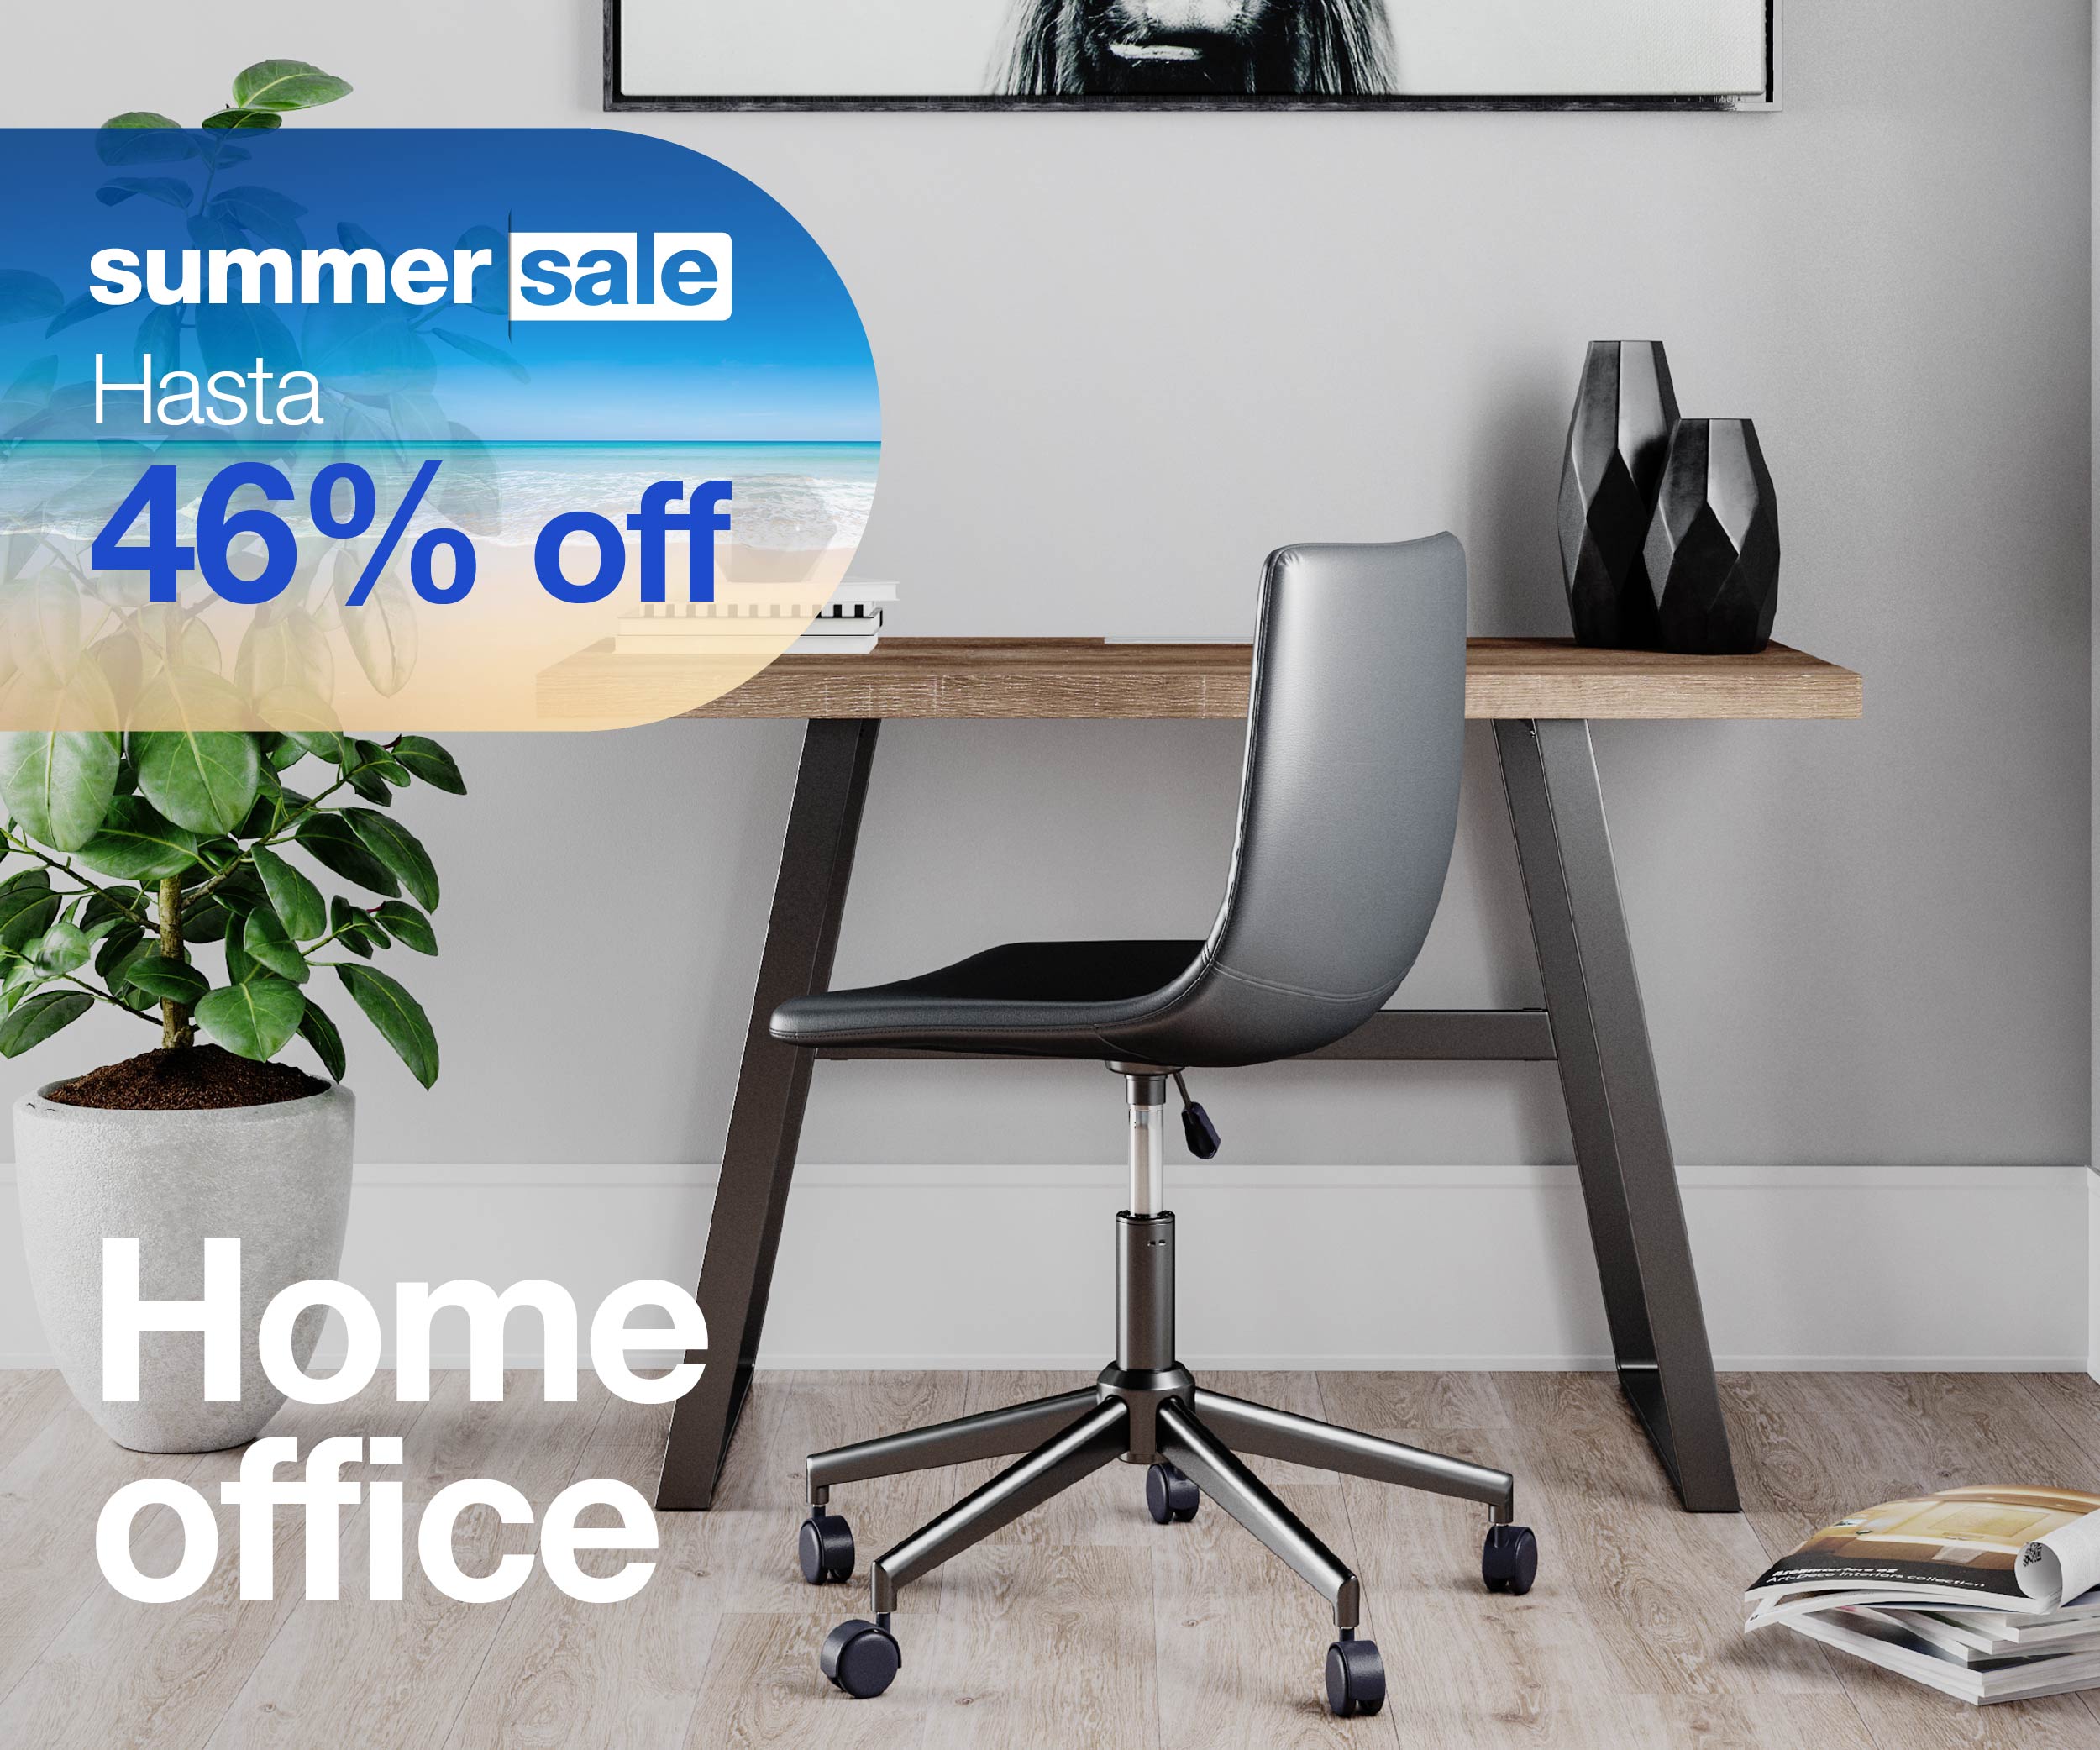 Summer sale Home office